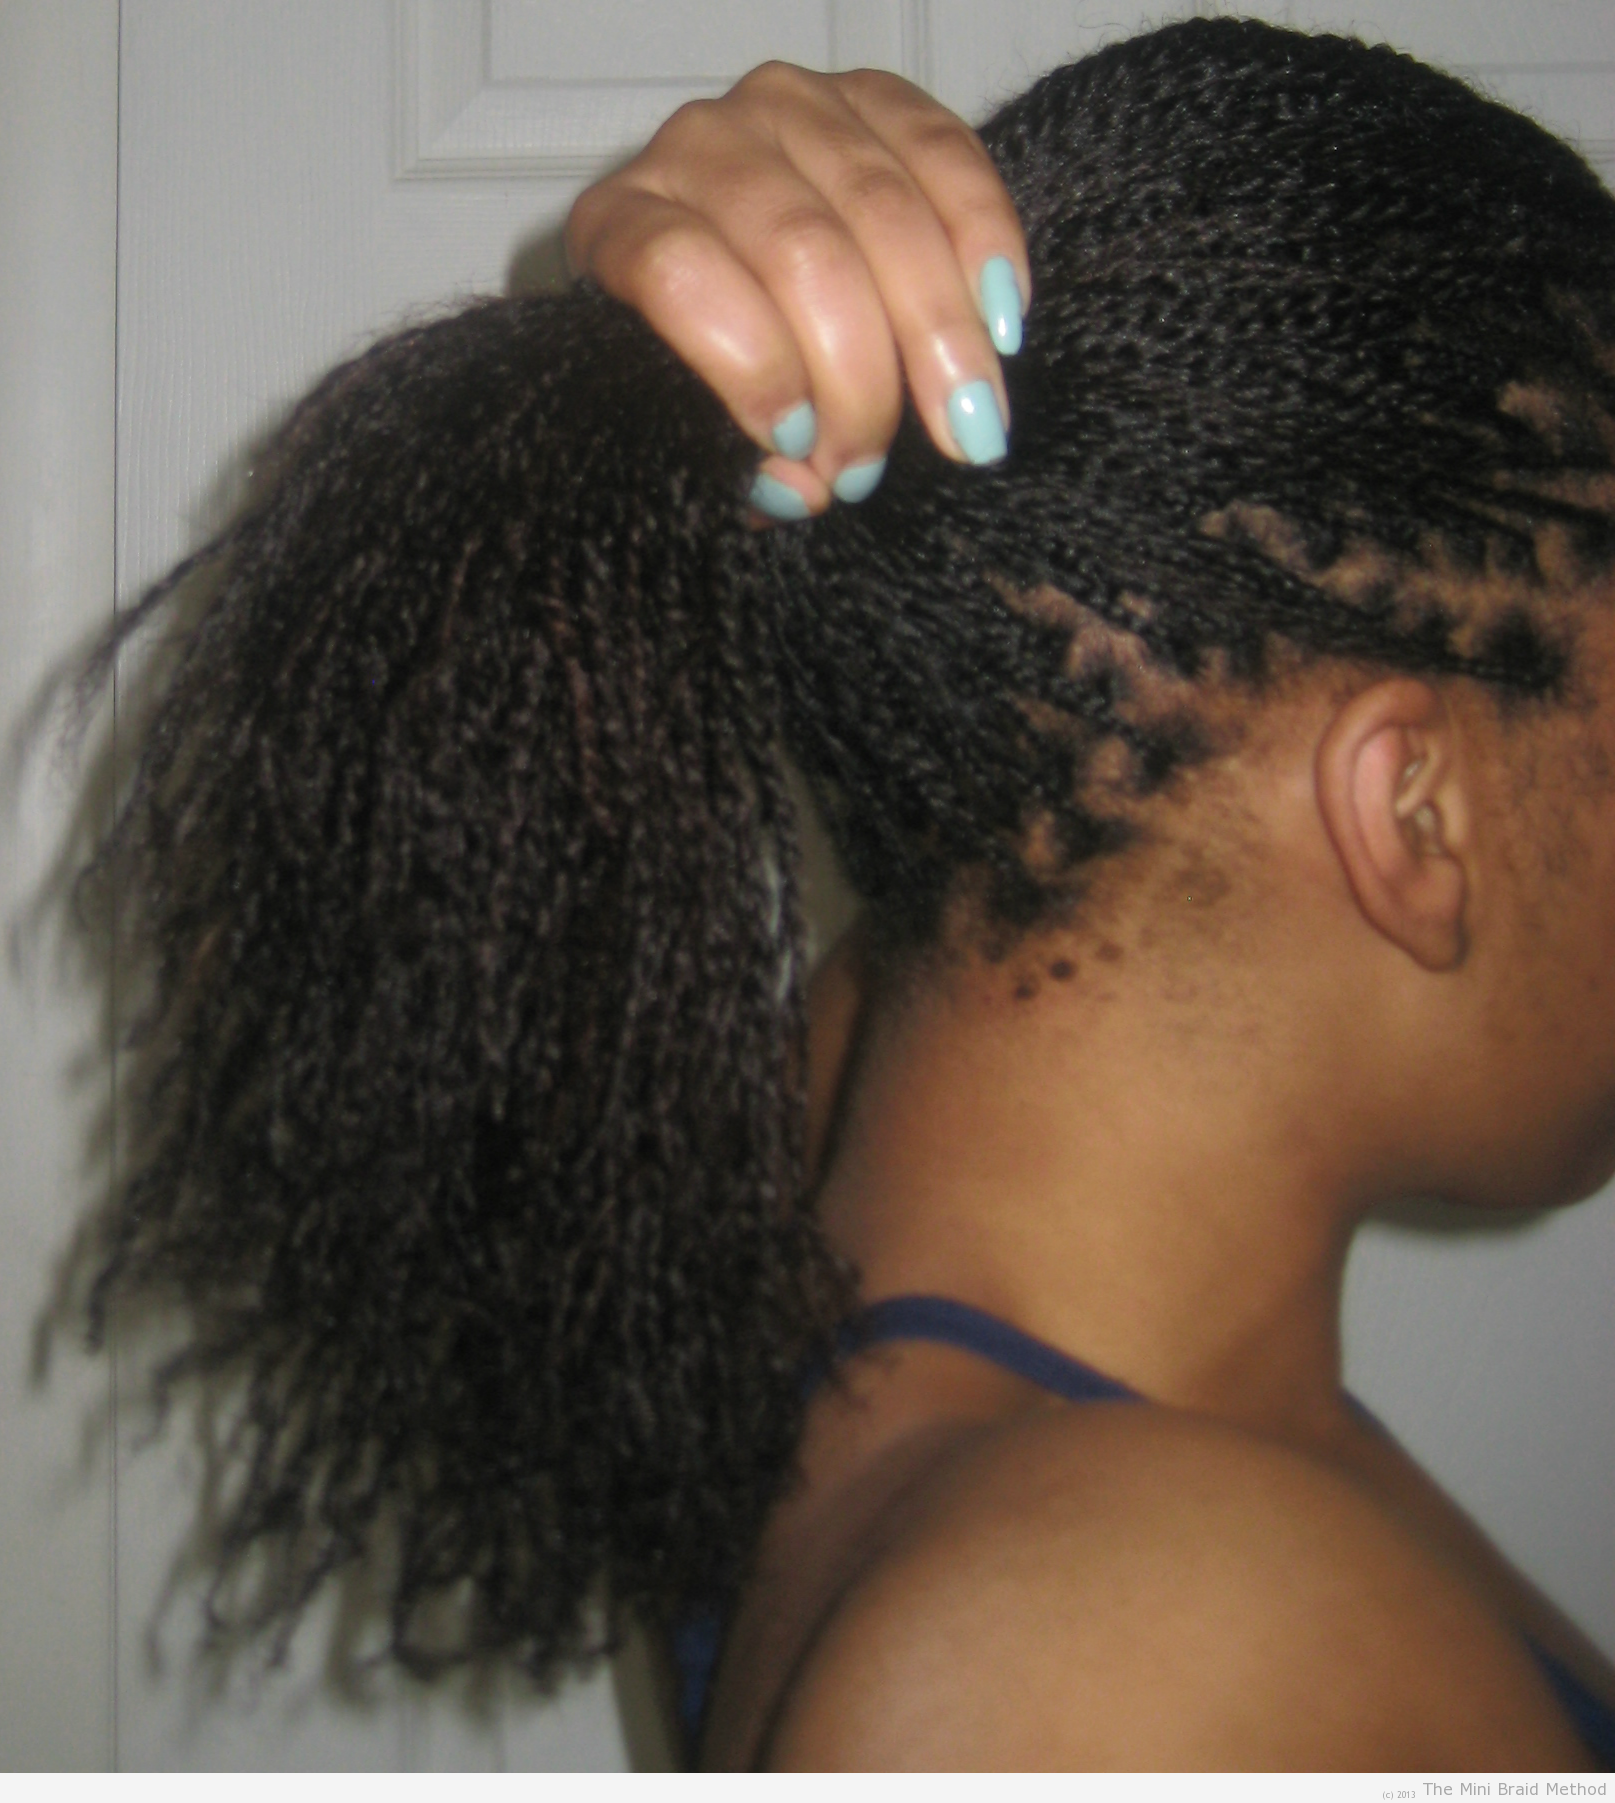 Mini twists give me so much life!!! If you are contemplating locs